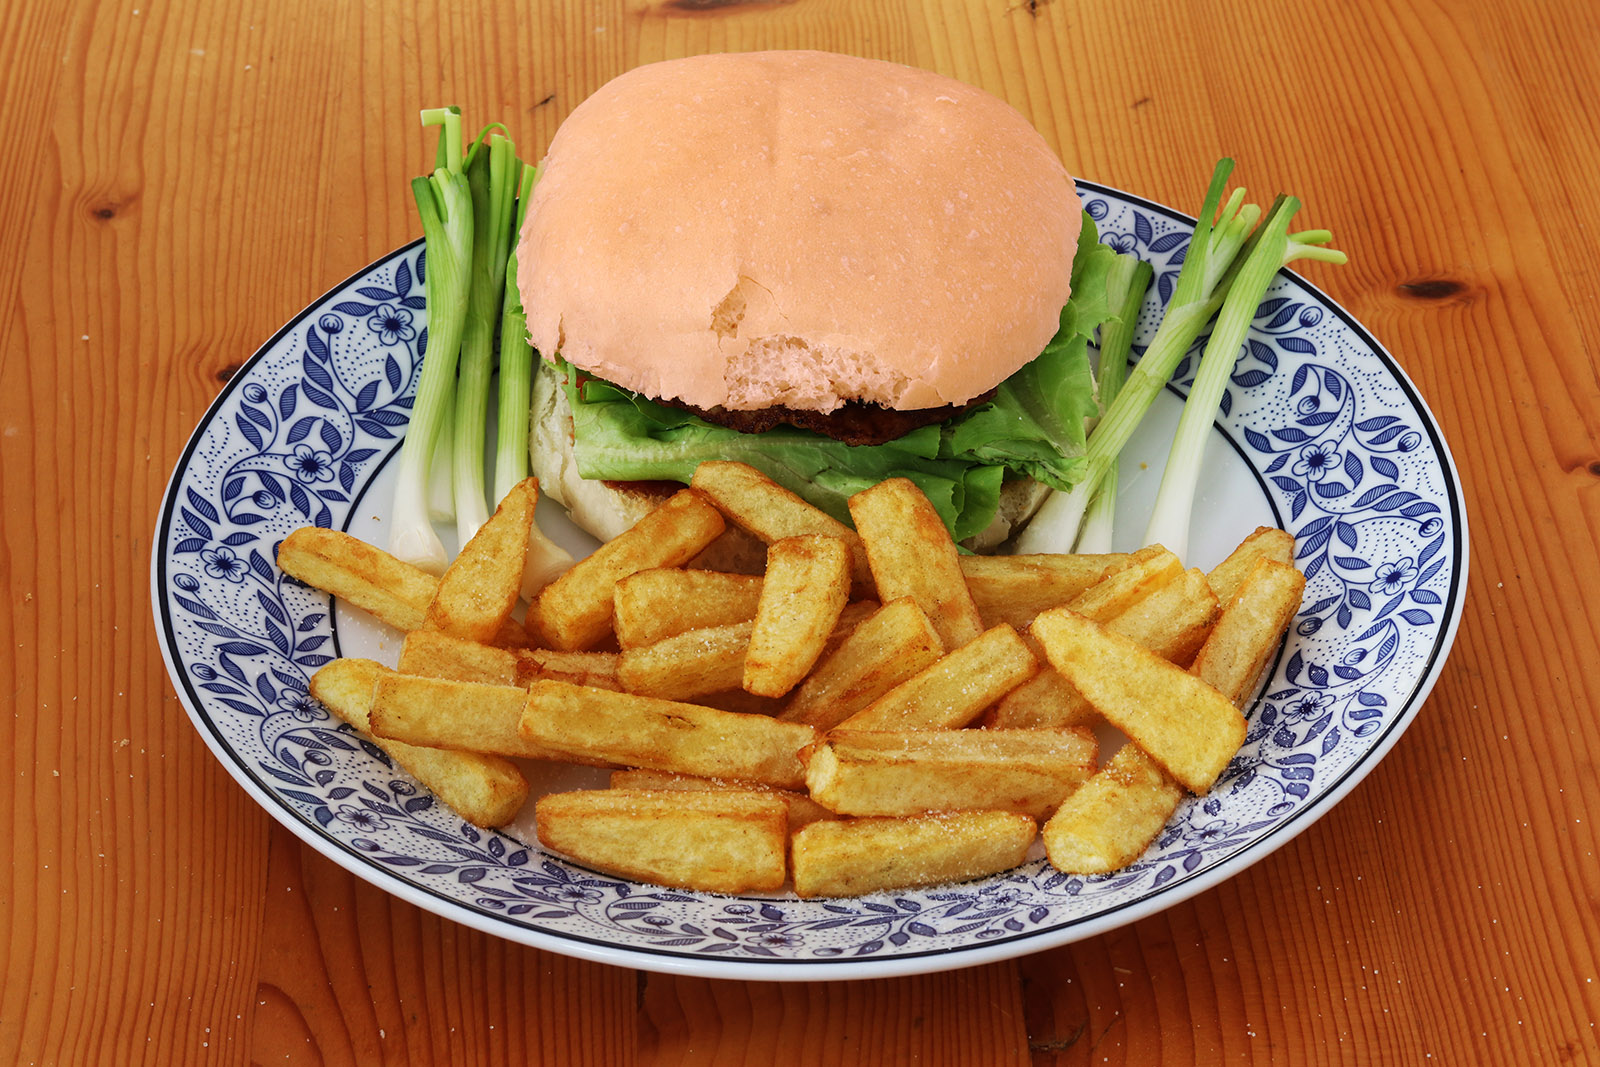 Served with chips s.jpg